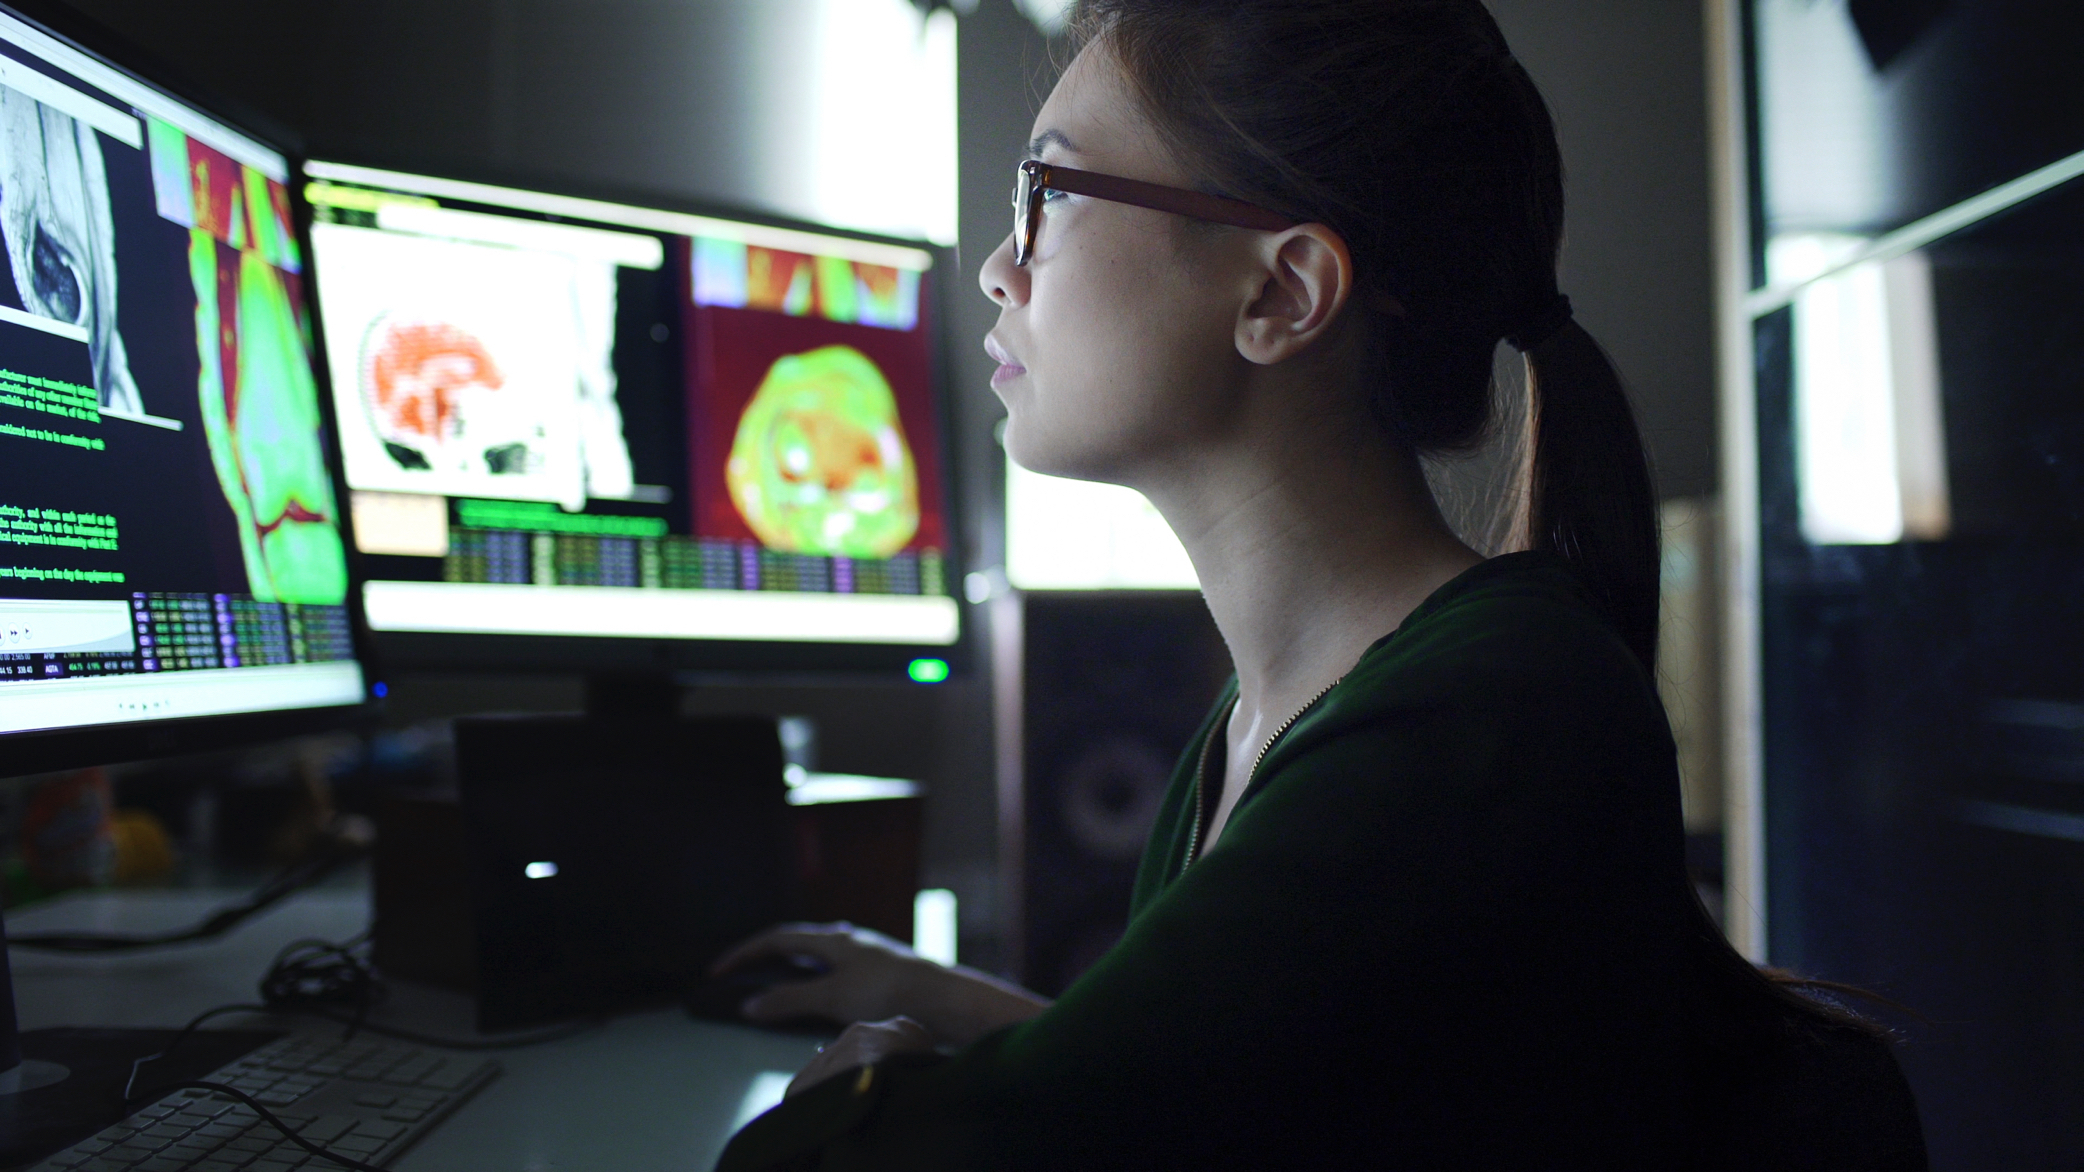 A woman looking at medical images on multiple computer monitors.